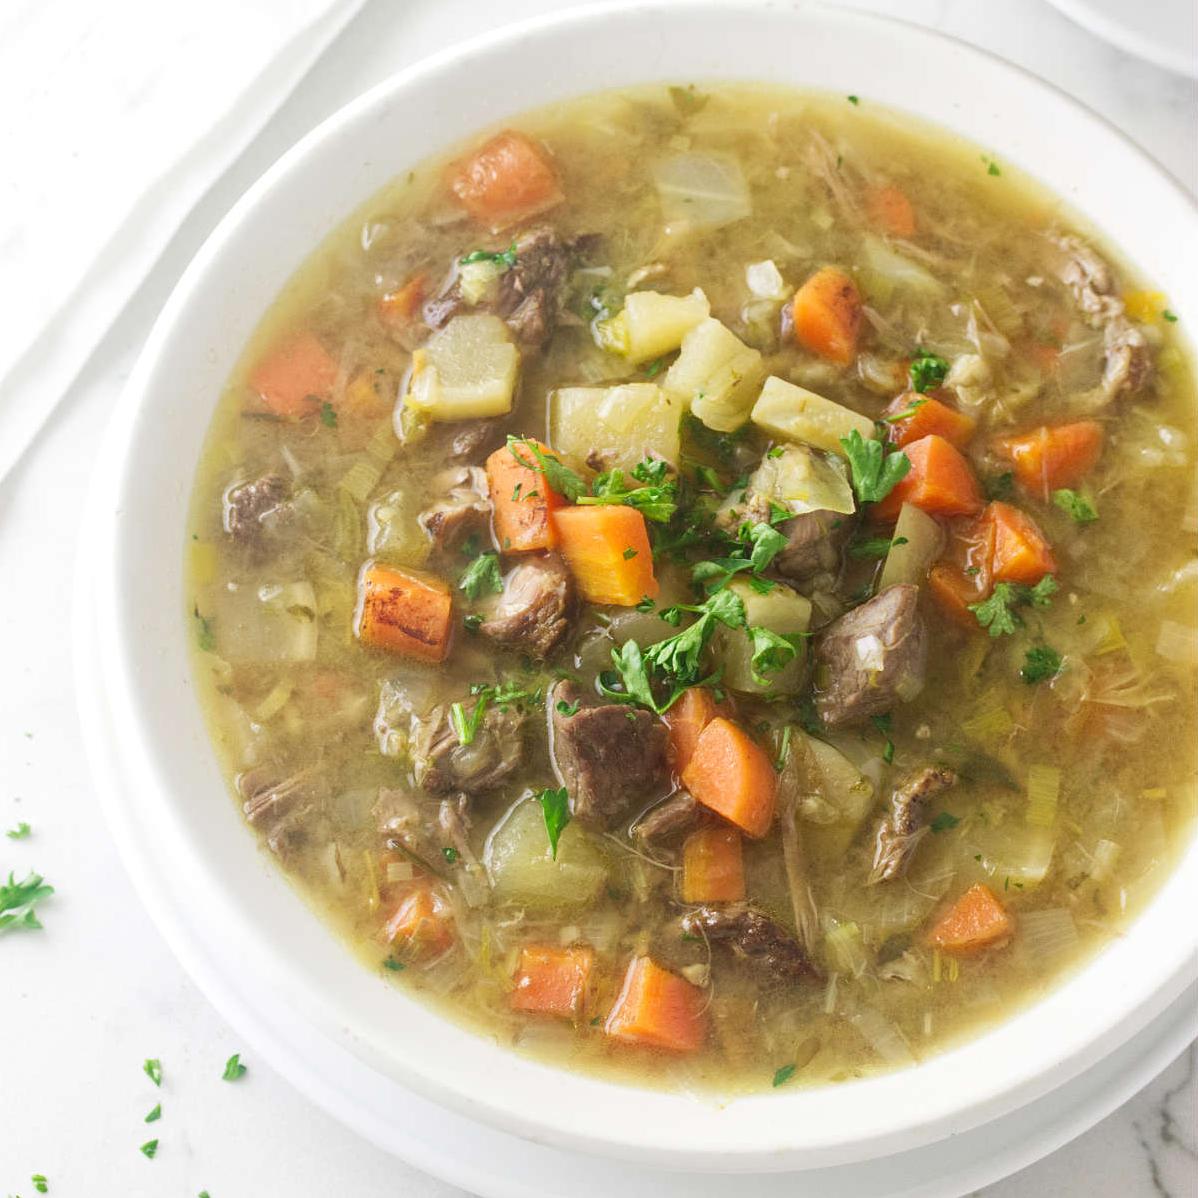  A bowl of heartiness and warmth: Traditional Scotch Broth Soup